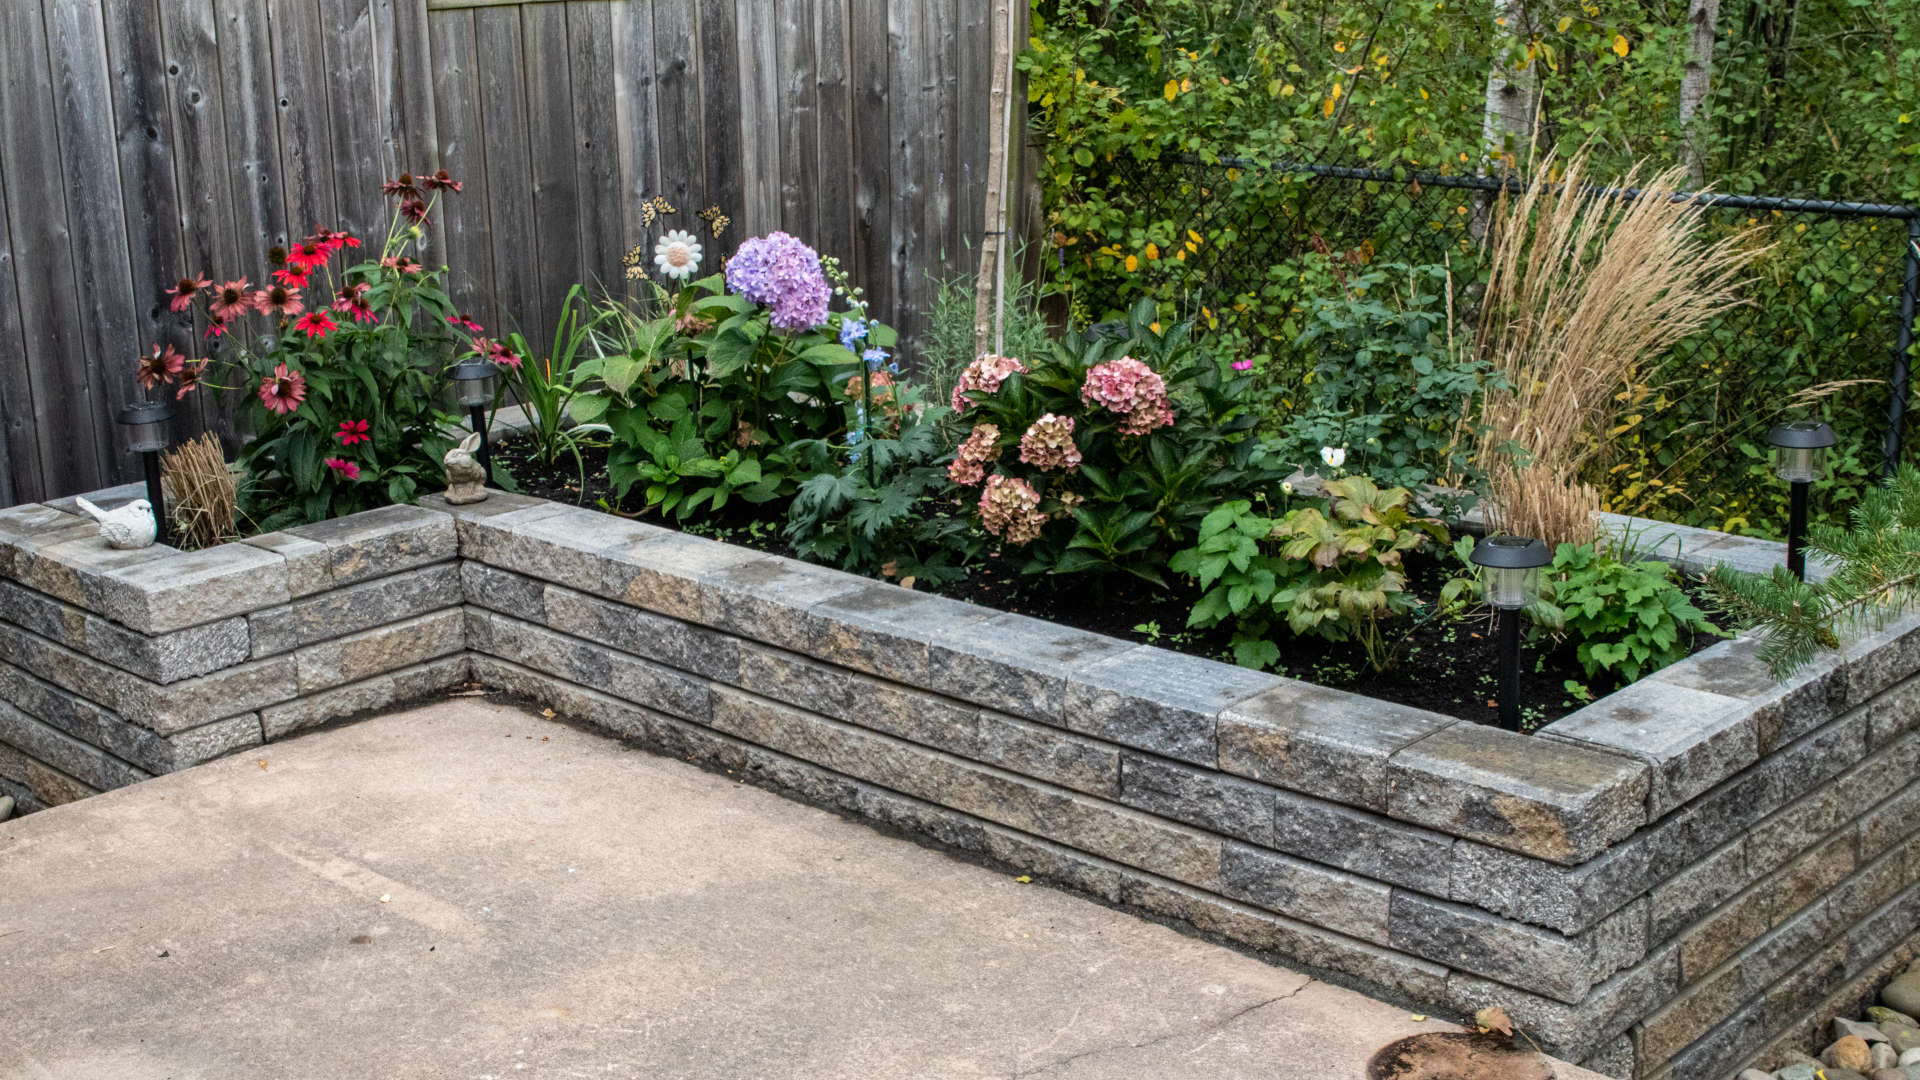 Landscaping, hardscaping and stonework project London Ontario. Stone retaining wall flower bed.